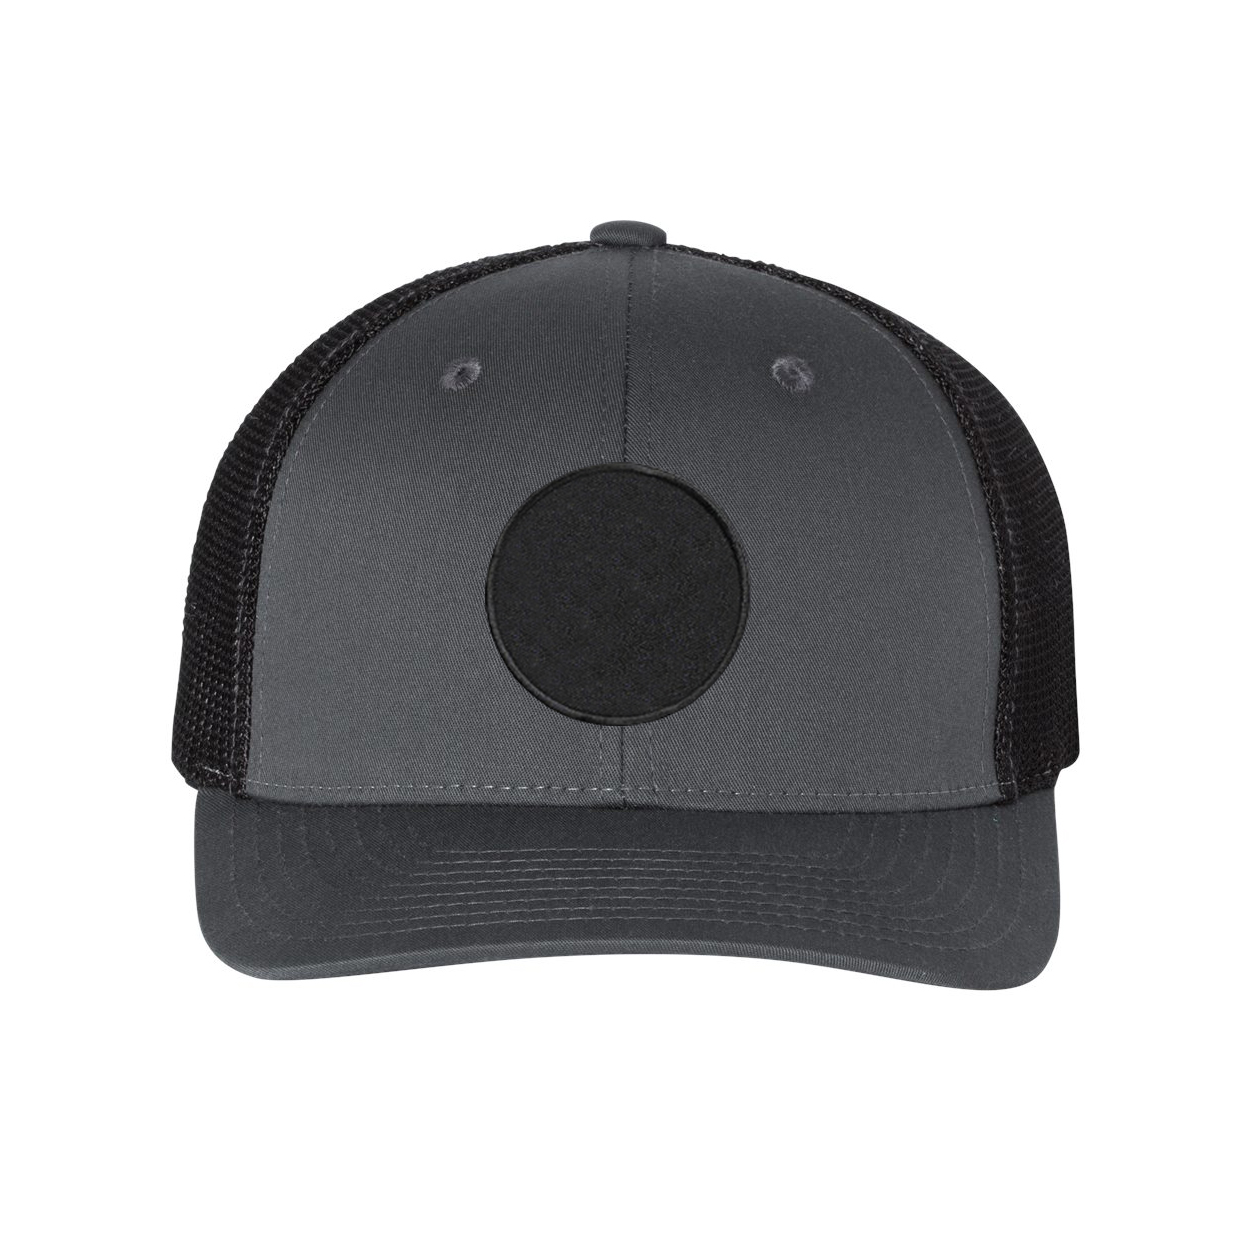 Product Details: Classic Woven Circle Patch Snapback Trucker Hat Gray/Black (BW 6 PANEL SNAPBACK MESH 5216)